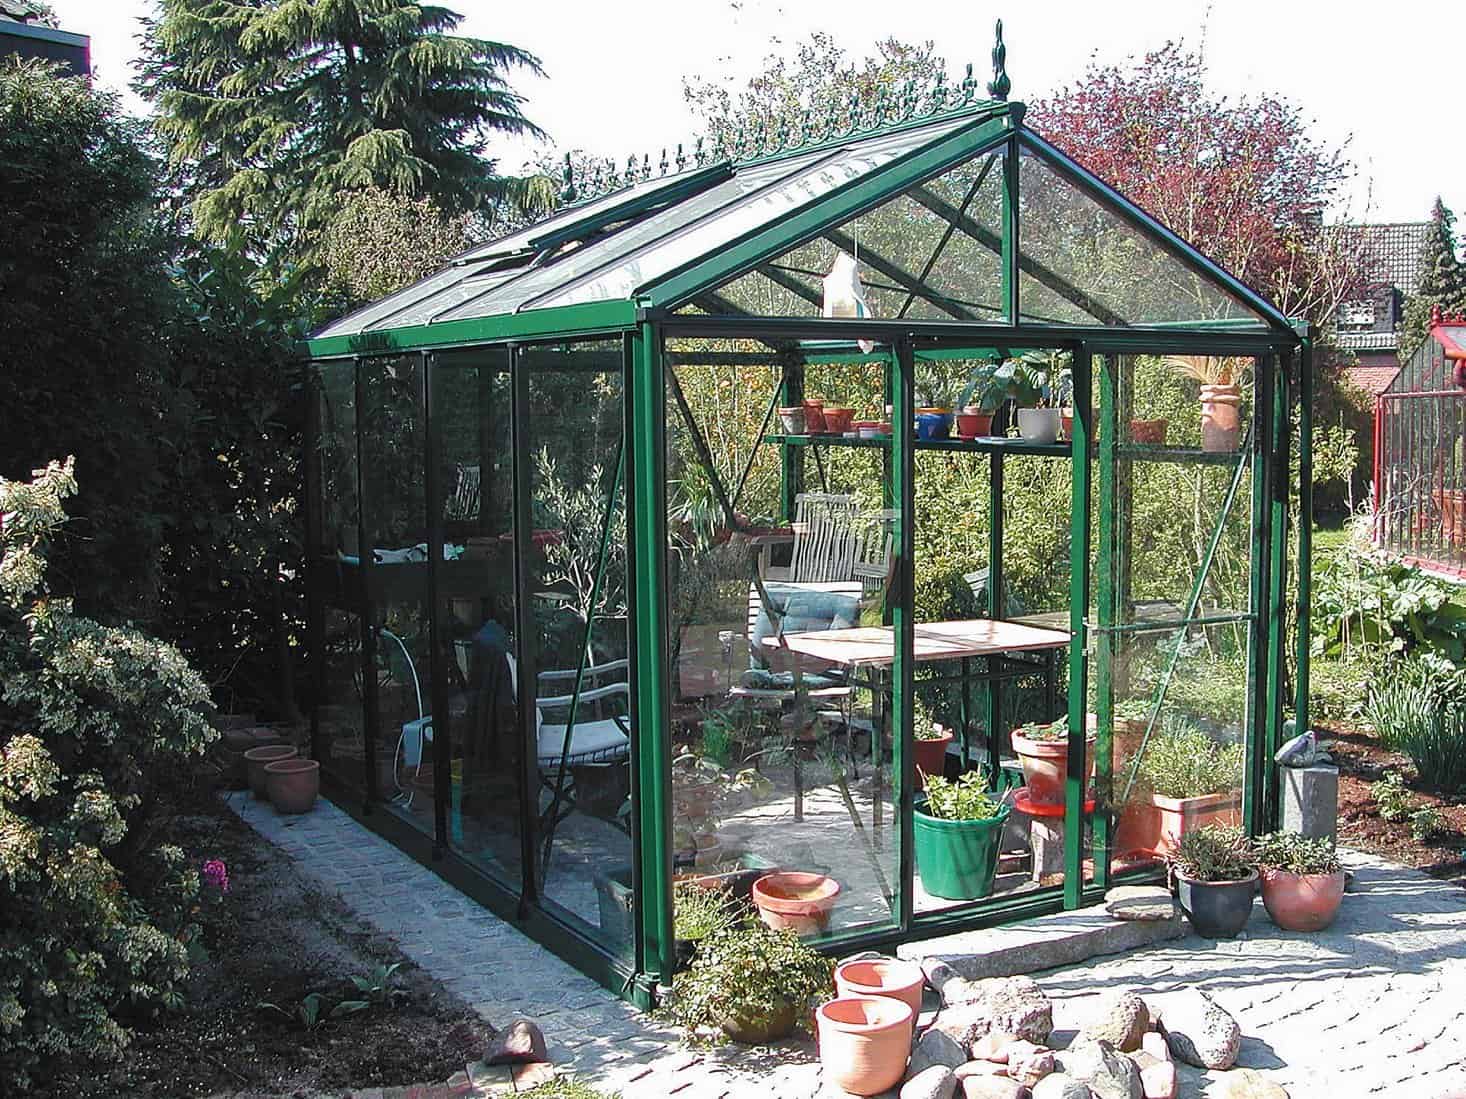 Exaco Royal Victorian Greenhouse in Dark Green with 4mm Tempered Glass - 79 sq ft - Senior.com Greenhouses